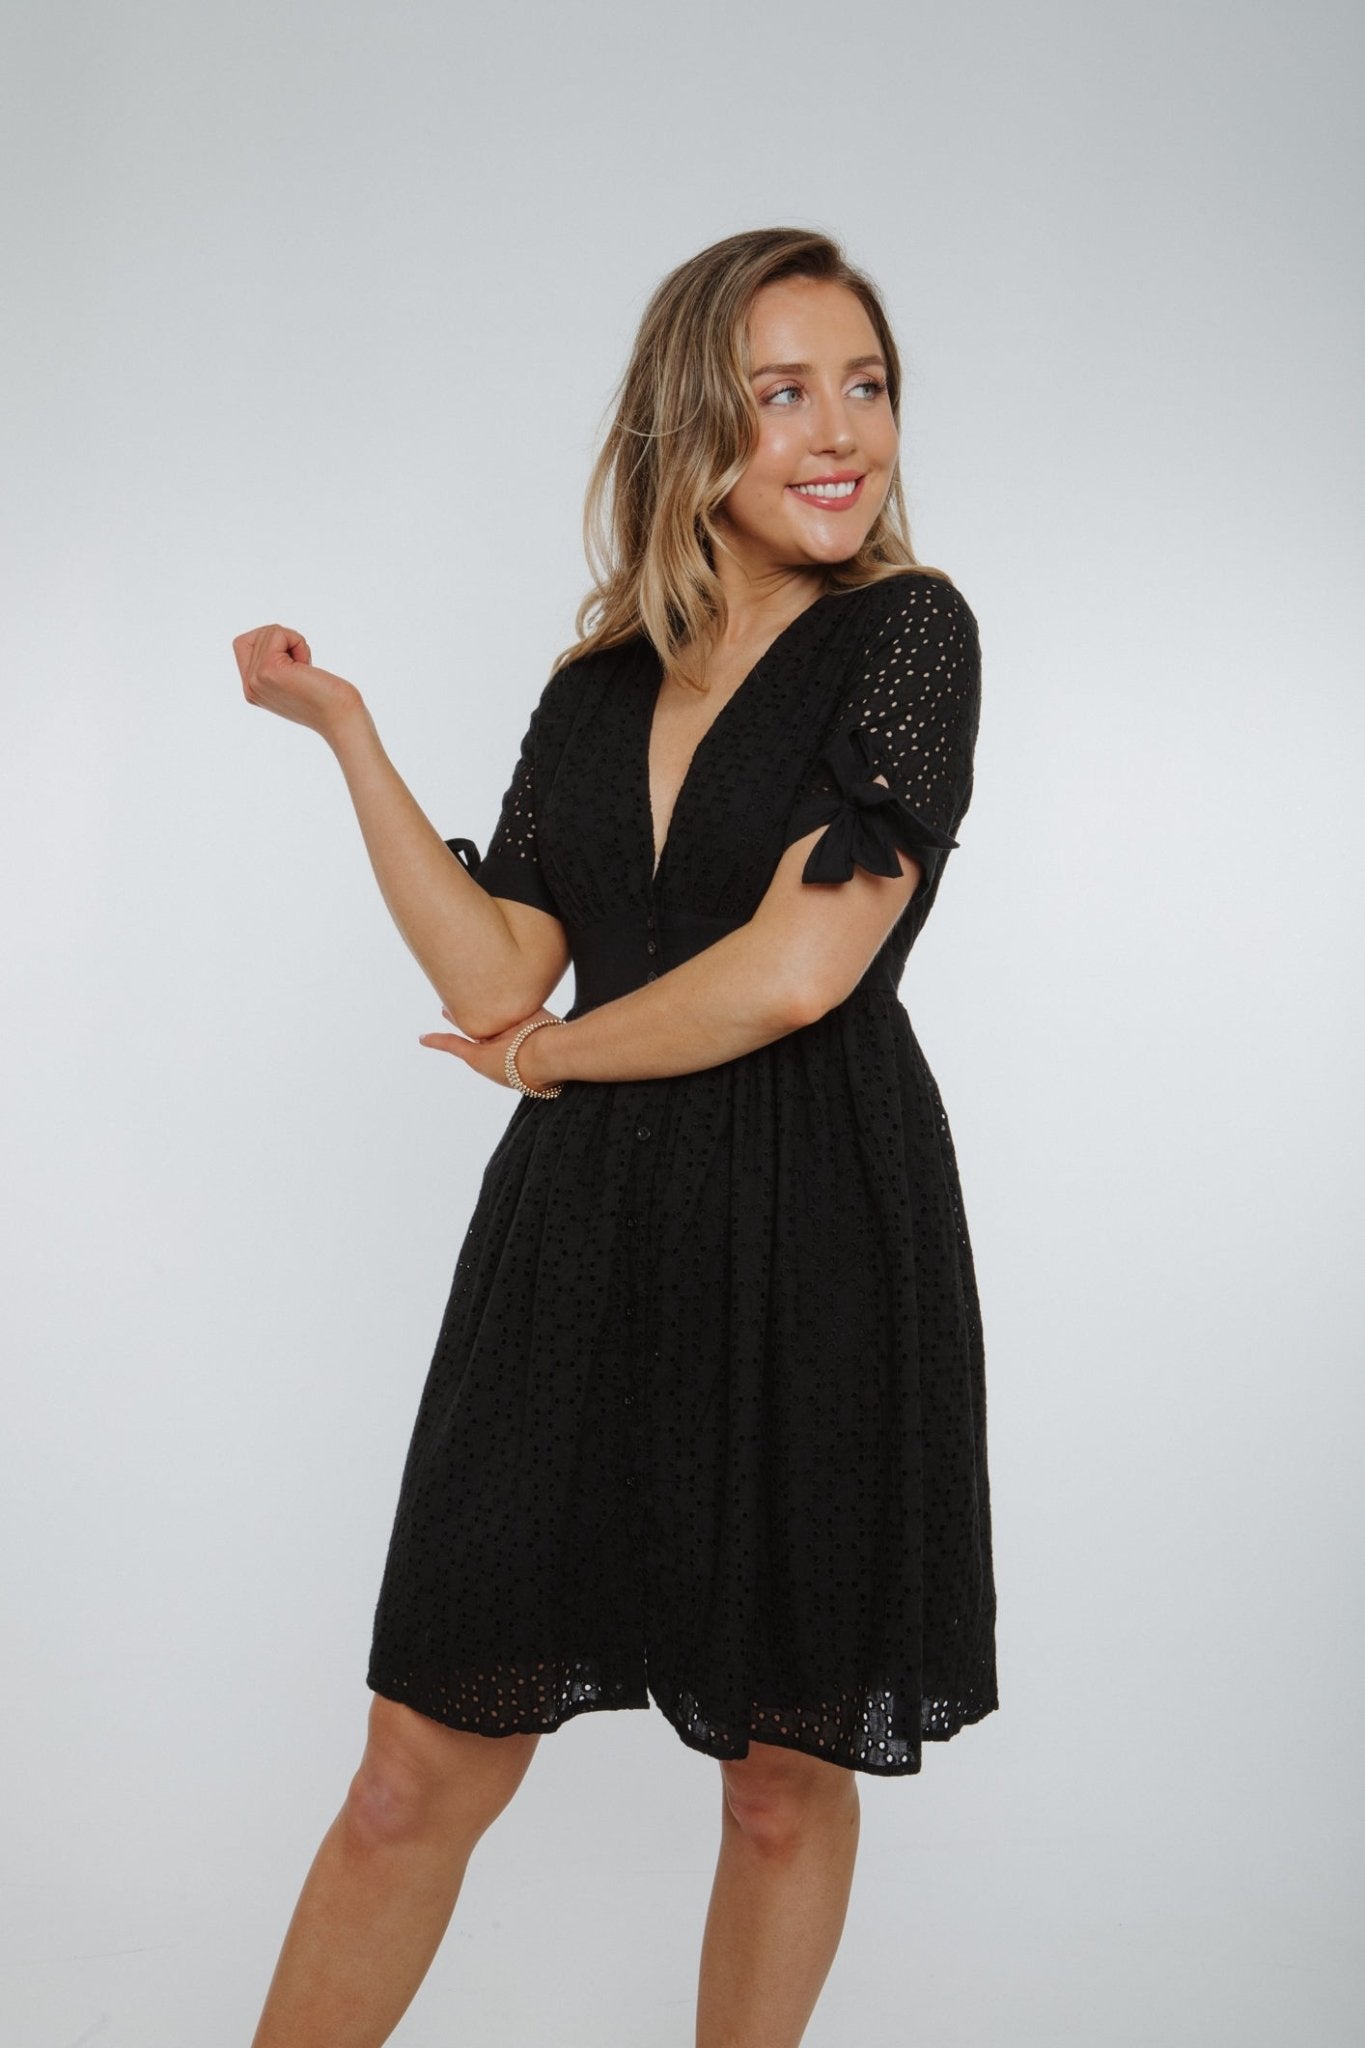 Polly Embroidered Dress In Black - The Walk in Wardrobe